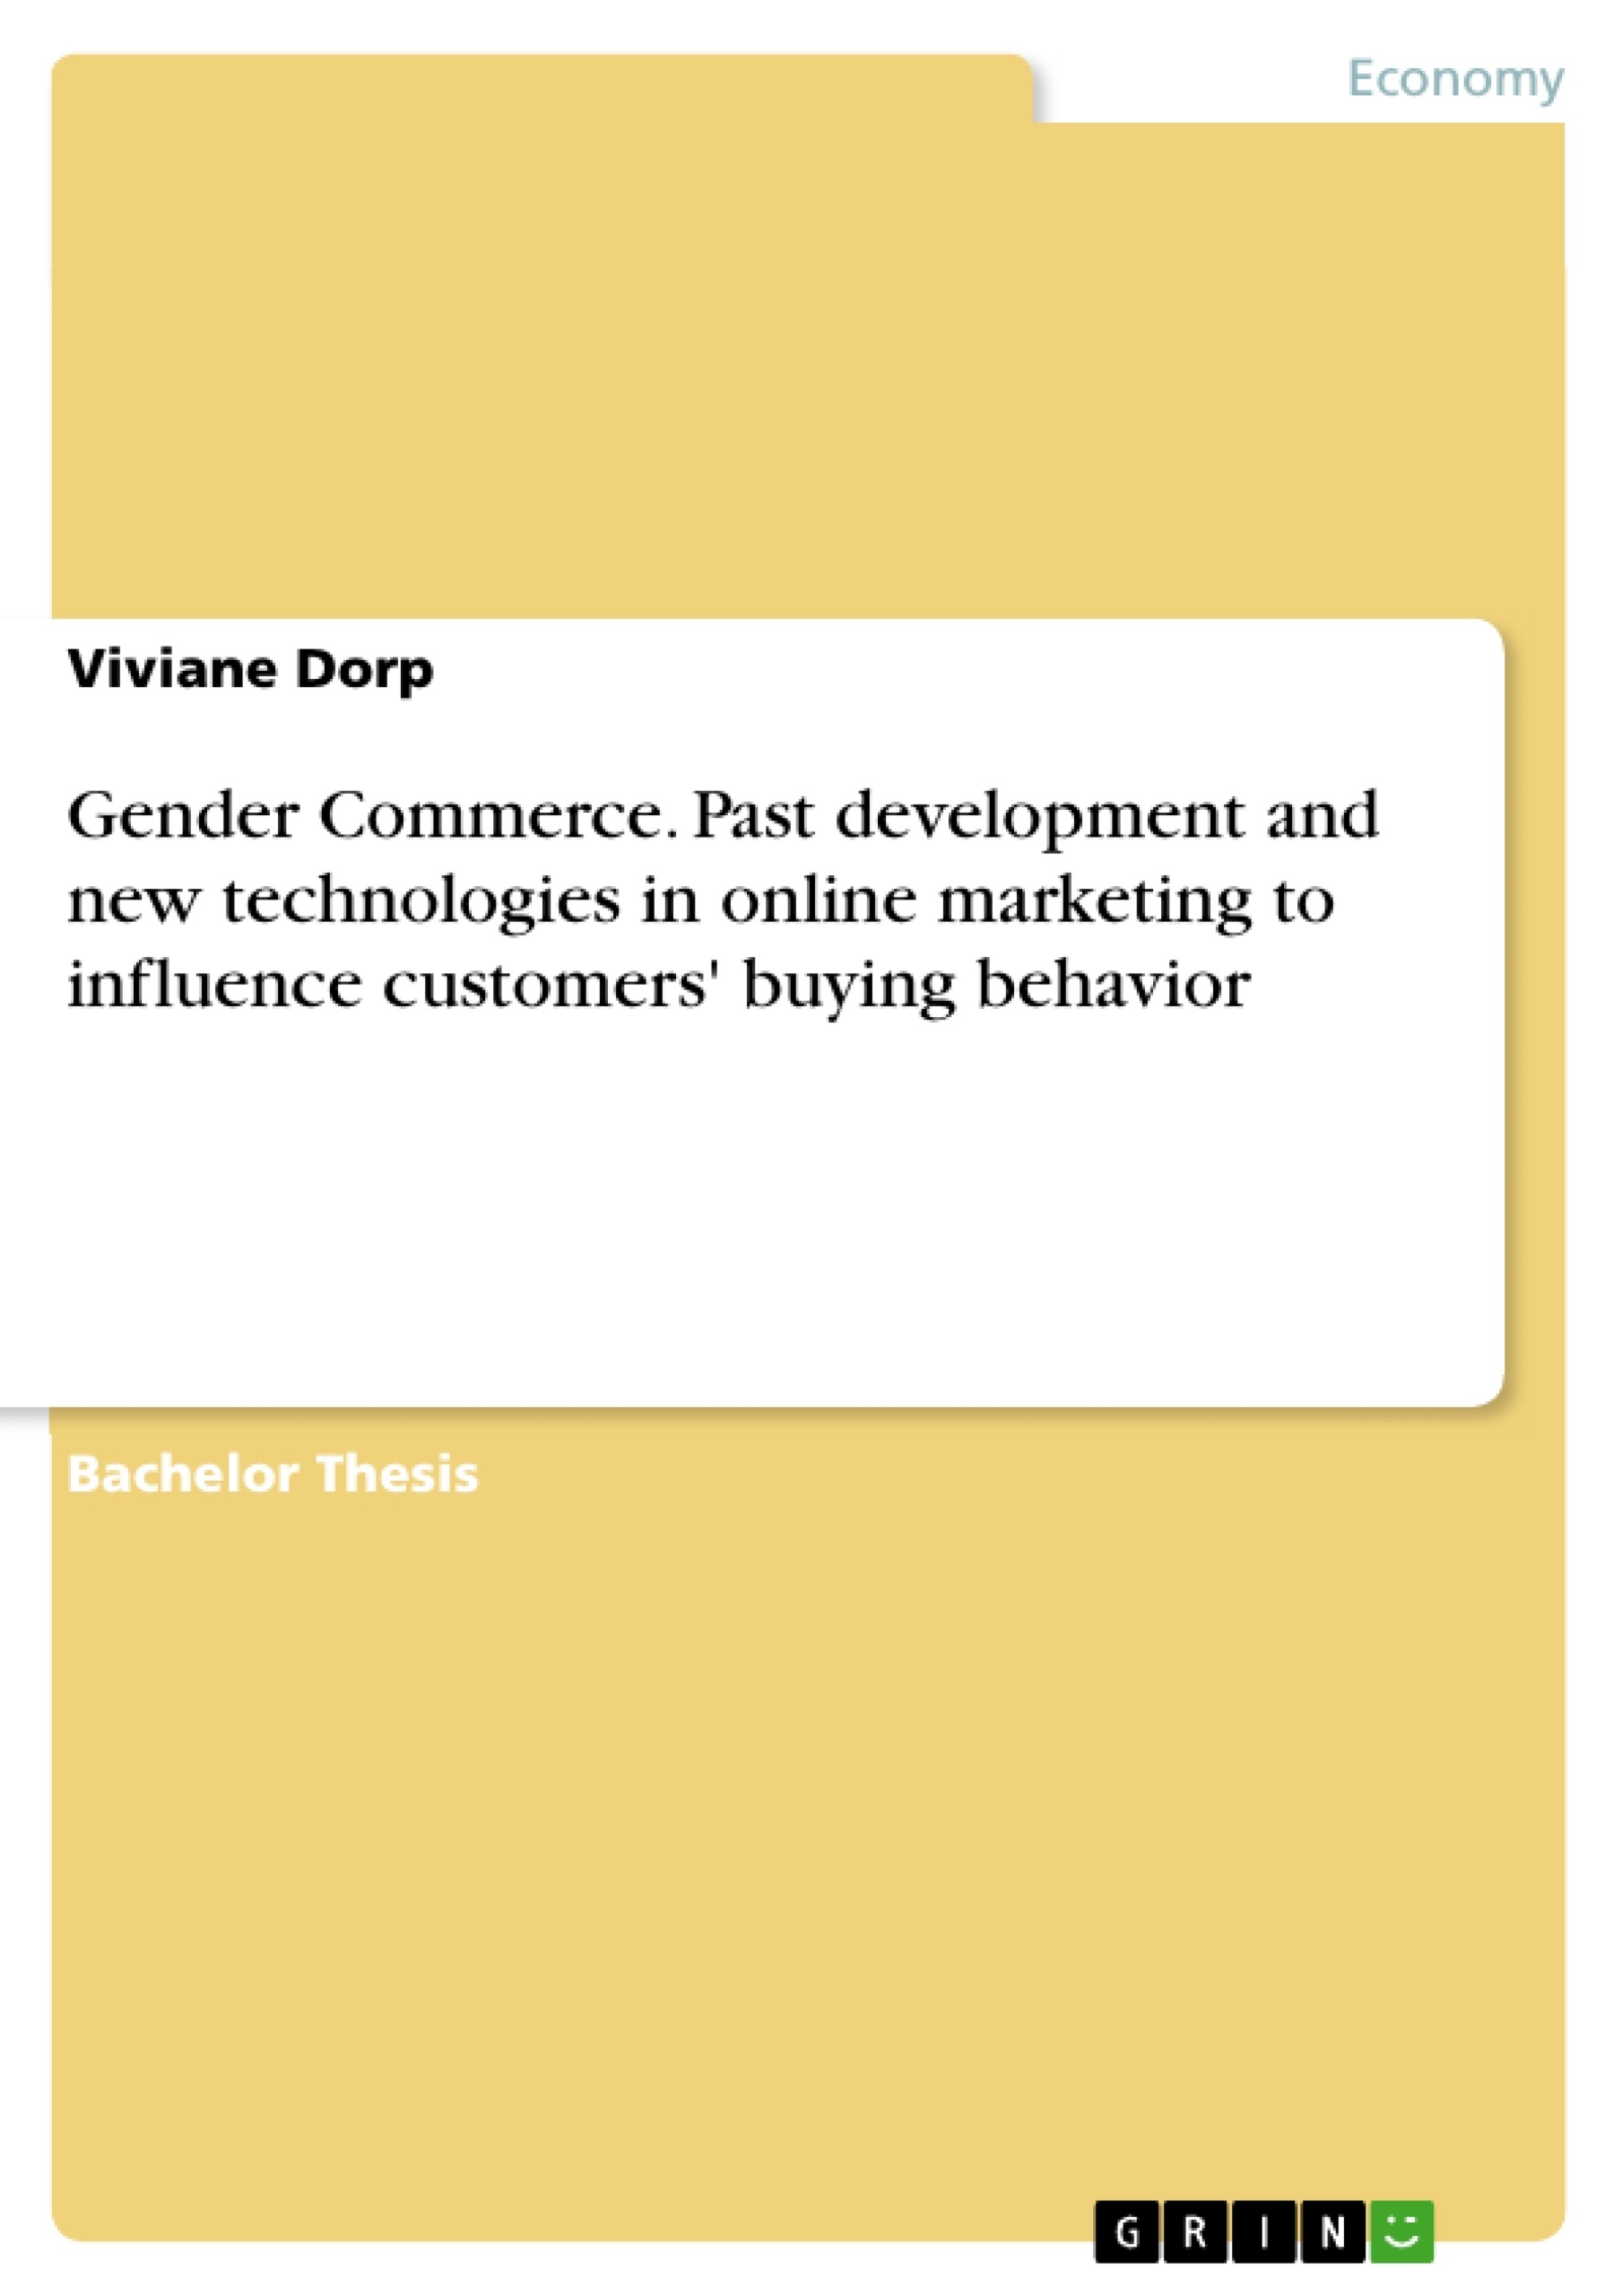 Title: Gender Commerce. Past development and new technologies in online marketing to influence customers' buying behavior